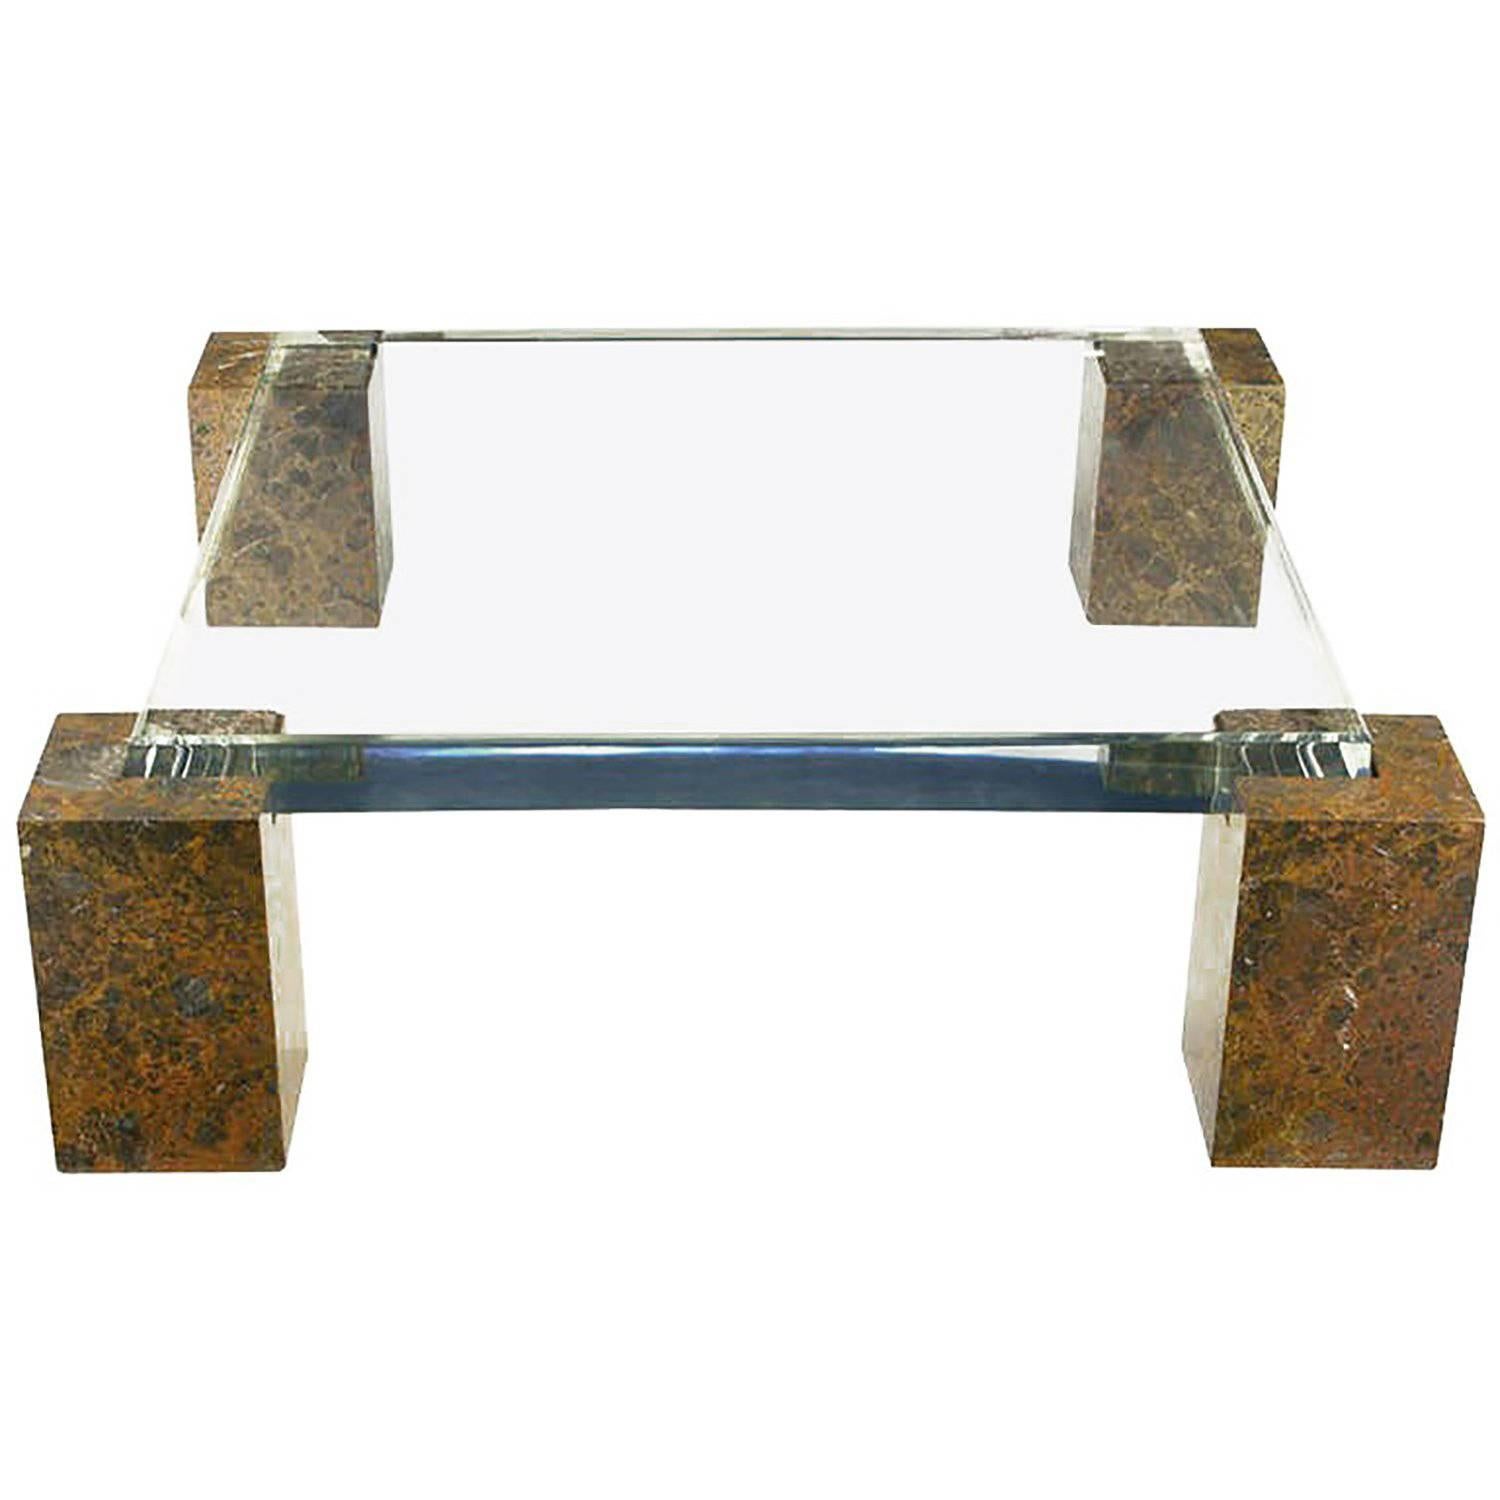 Brazilian Red Marble Column Coffee Table with Thick Lucite Top